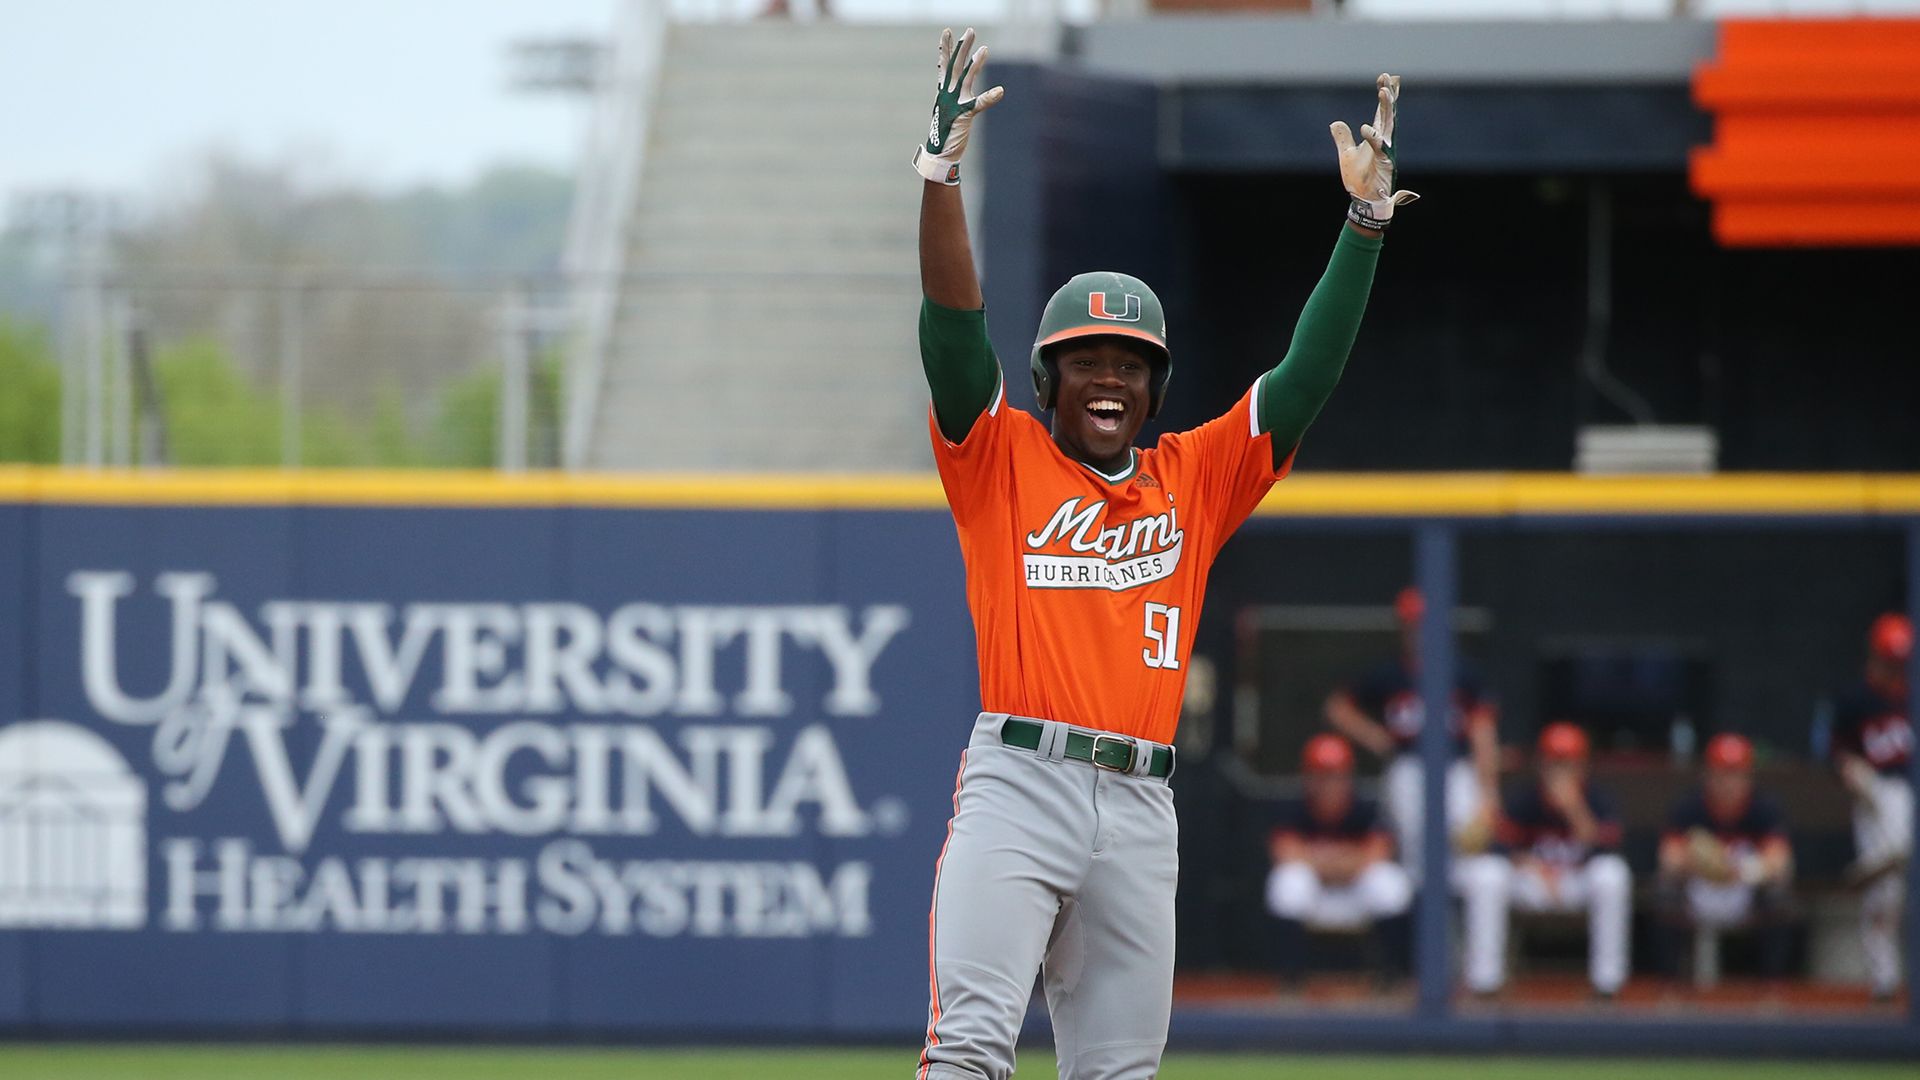 Canes Sweep Doubleheader with 2-1 Win